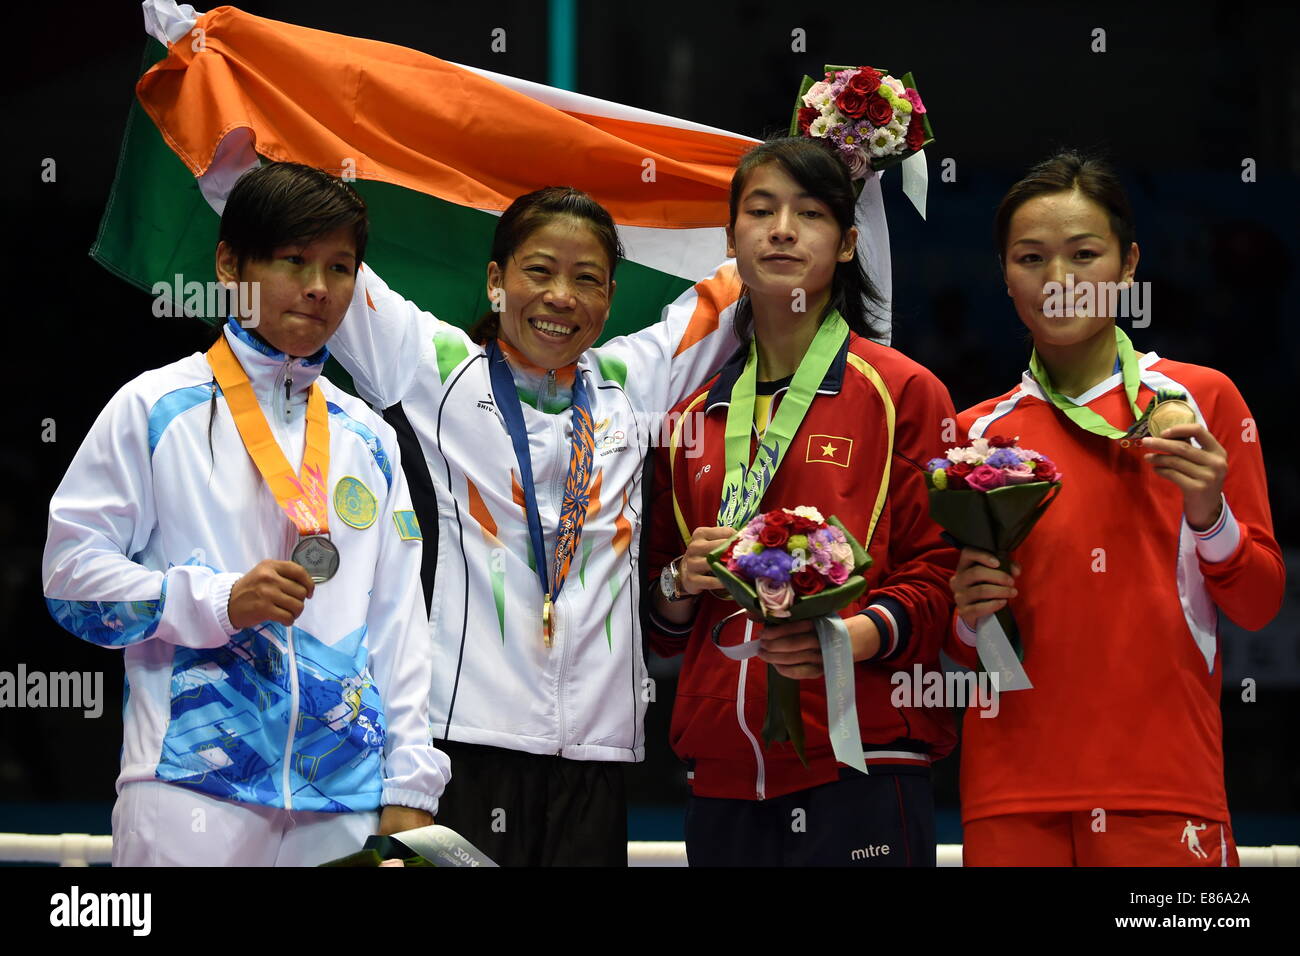 Incheon, South Korea. 1st Oct, 2014. Gold medalist Hmangte Kom (2nd L) of India, silver medalist Shekerbekova Zhaina of Kazakhstan (1st L) and bronze medalists Le Thai Bang (2nd R) of Vietnam and Myagmardulam Nandintsetseg of Mongolia pose during the awarding ceremony of the women's light 48-51kg contest of boxing at the 17th Asian Games in Incheon, South Korea, Oct. 1, 2014. Credit:  Gao Jianjun/Xinhua/Alamy Live News Stock Photo